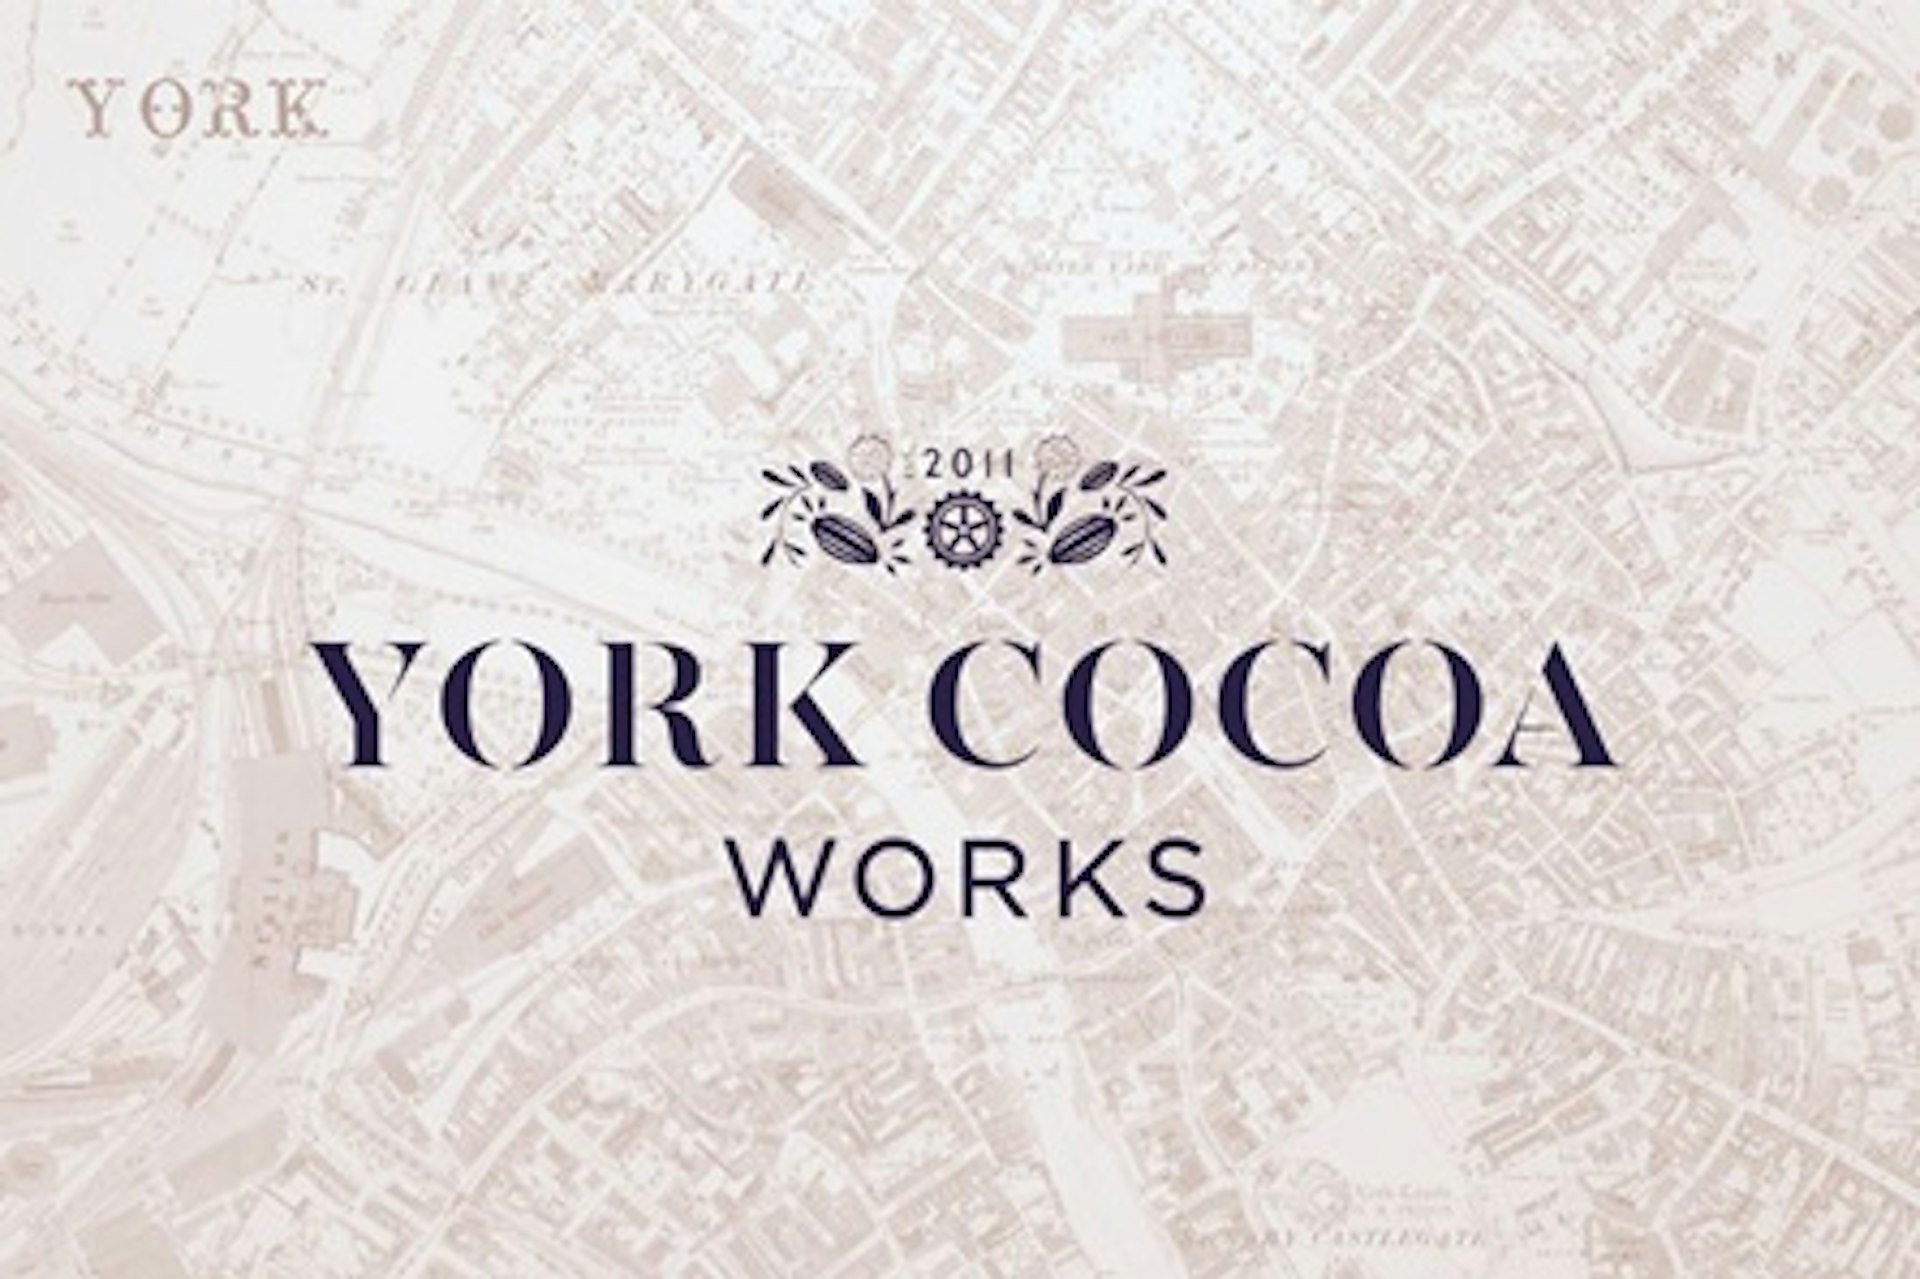 Introduction to Chocolate Making for Two at York Cocoa Works 4